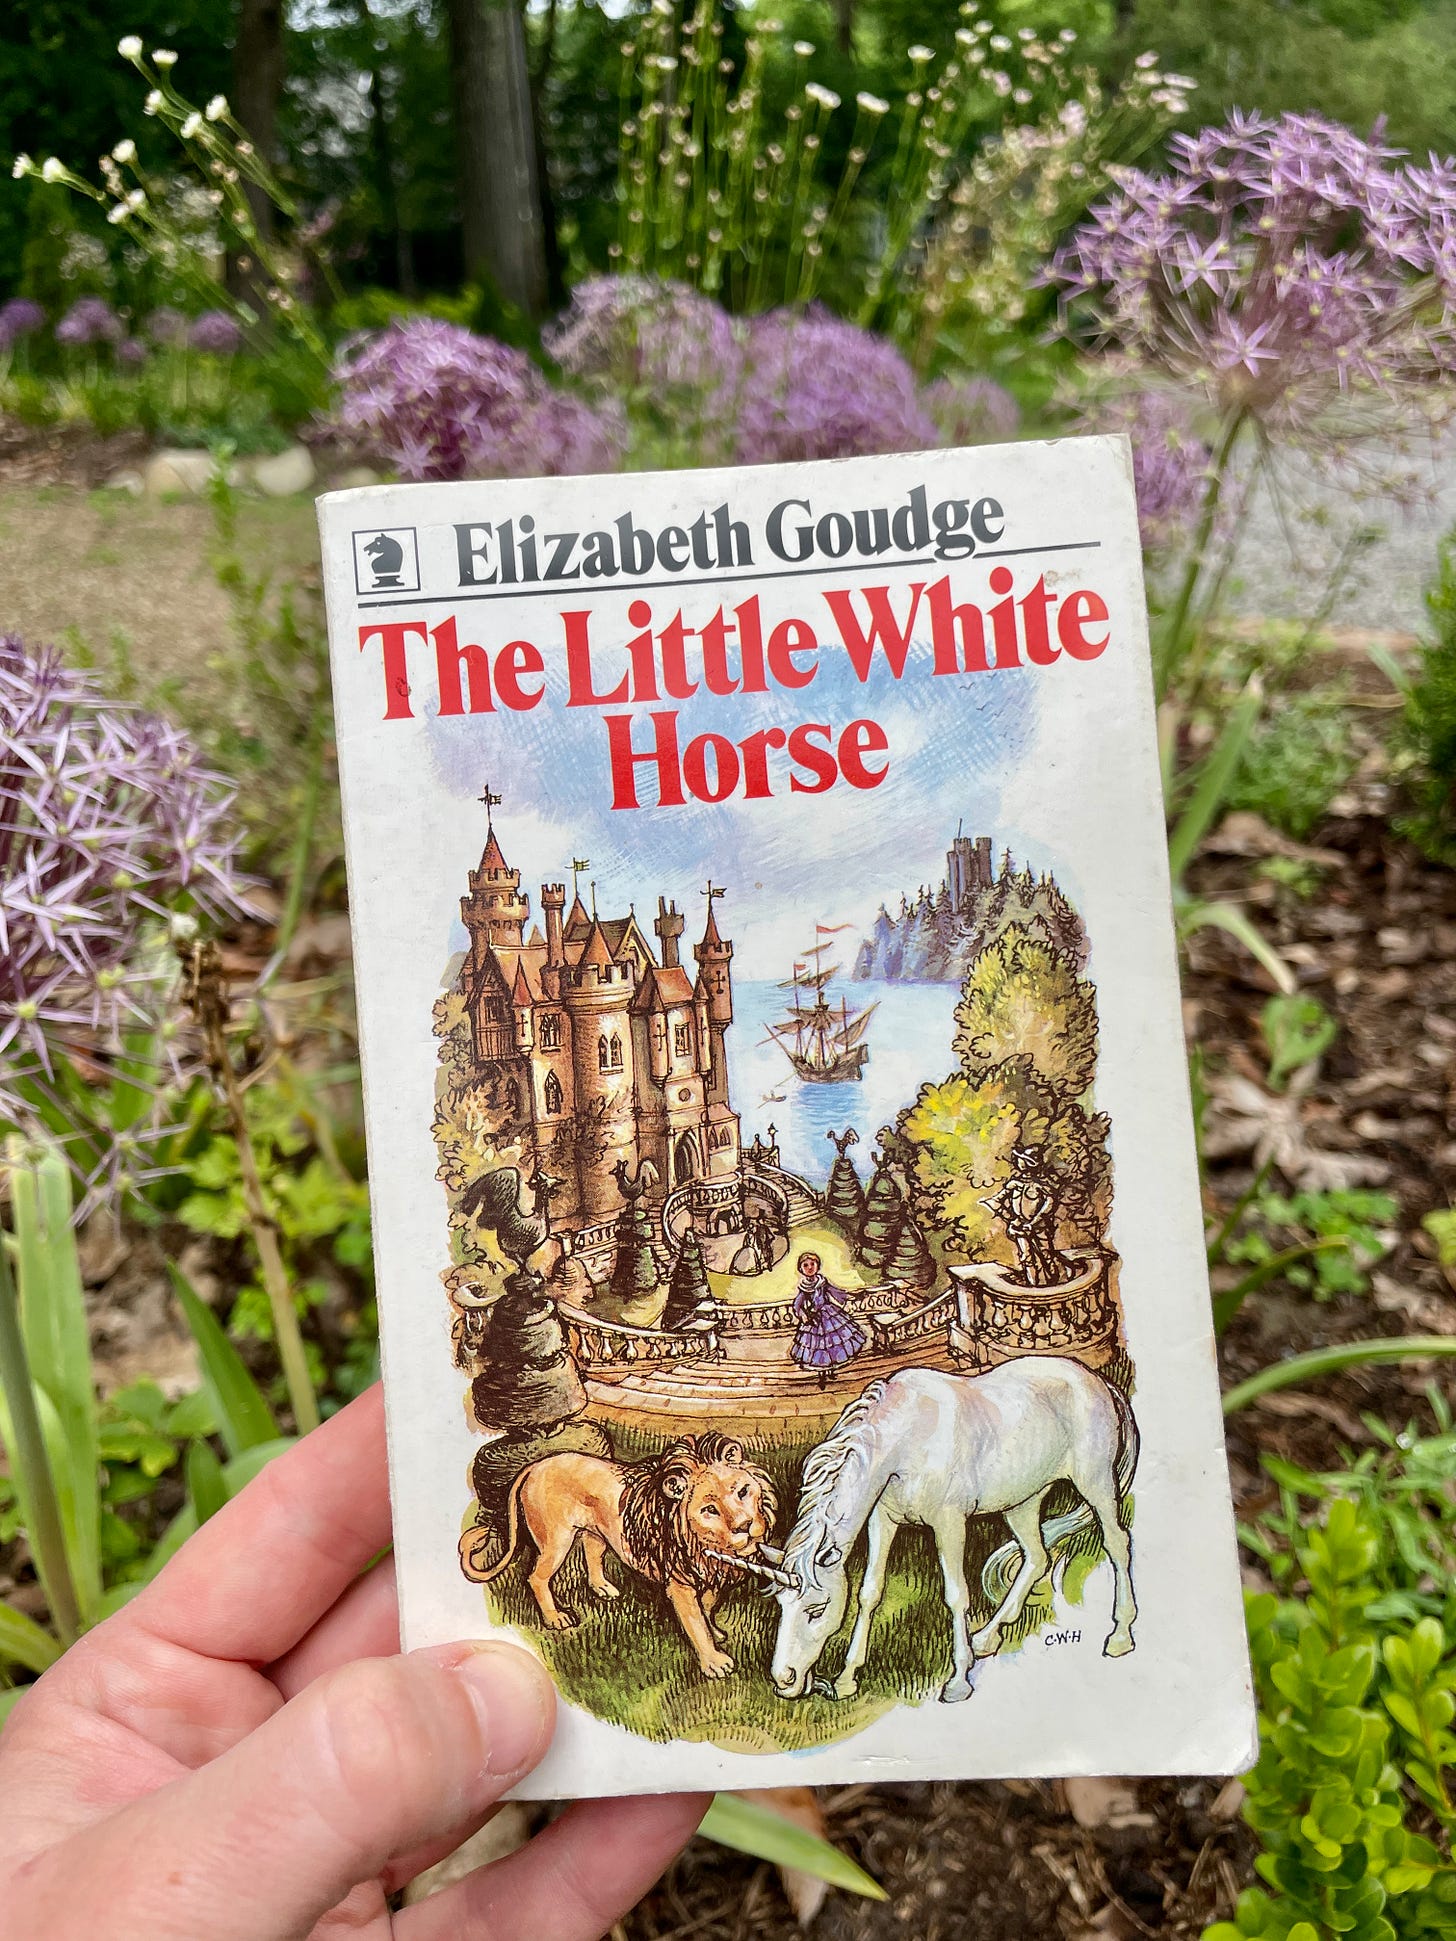 The colorful cover of the Knight Books edition of The Little White Horse by Elizabeth Goudge